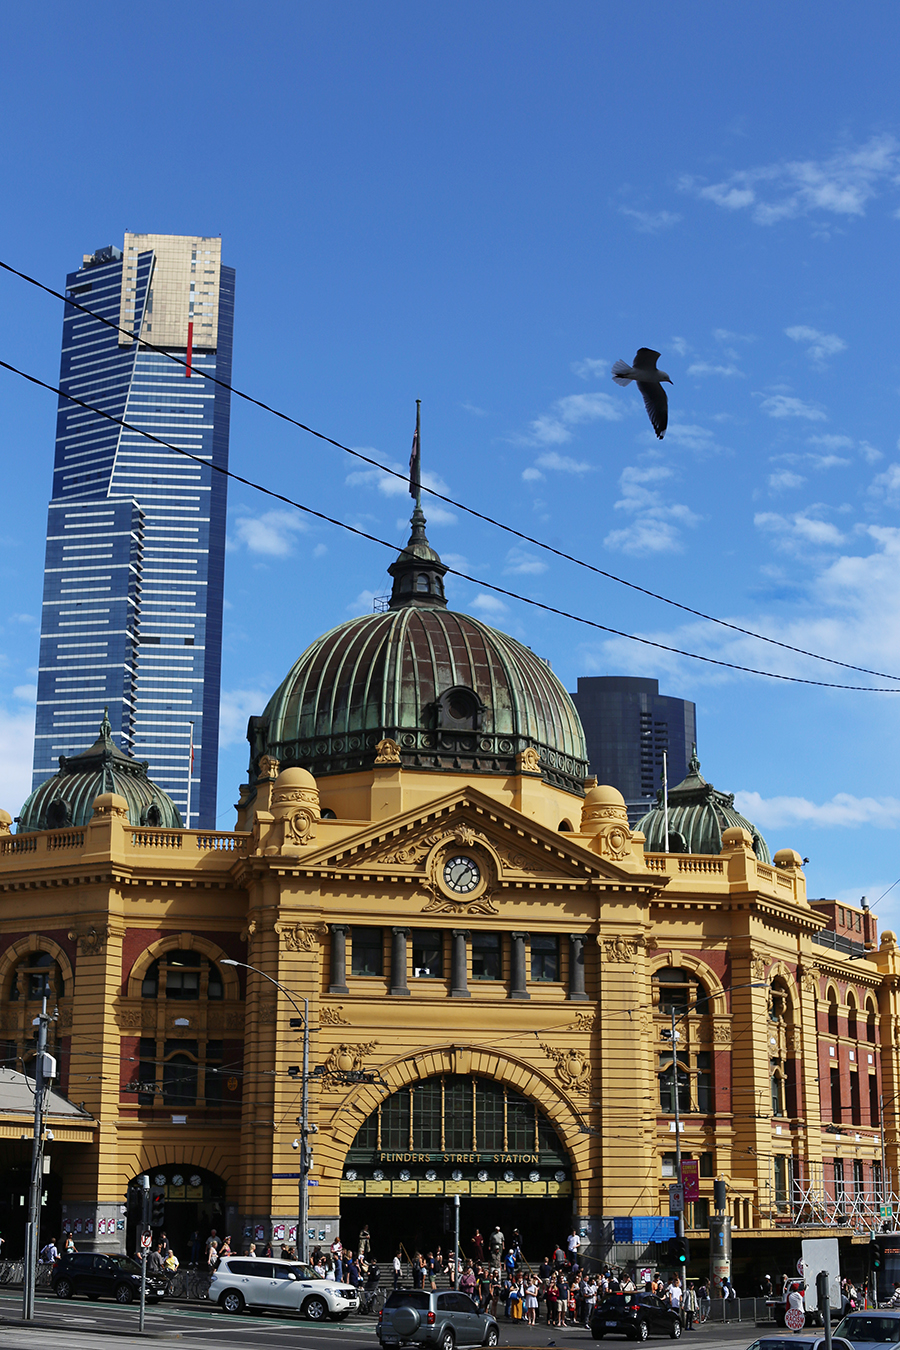 Melbourne, Australia: 10 Things You Must Do In Melbourne